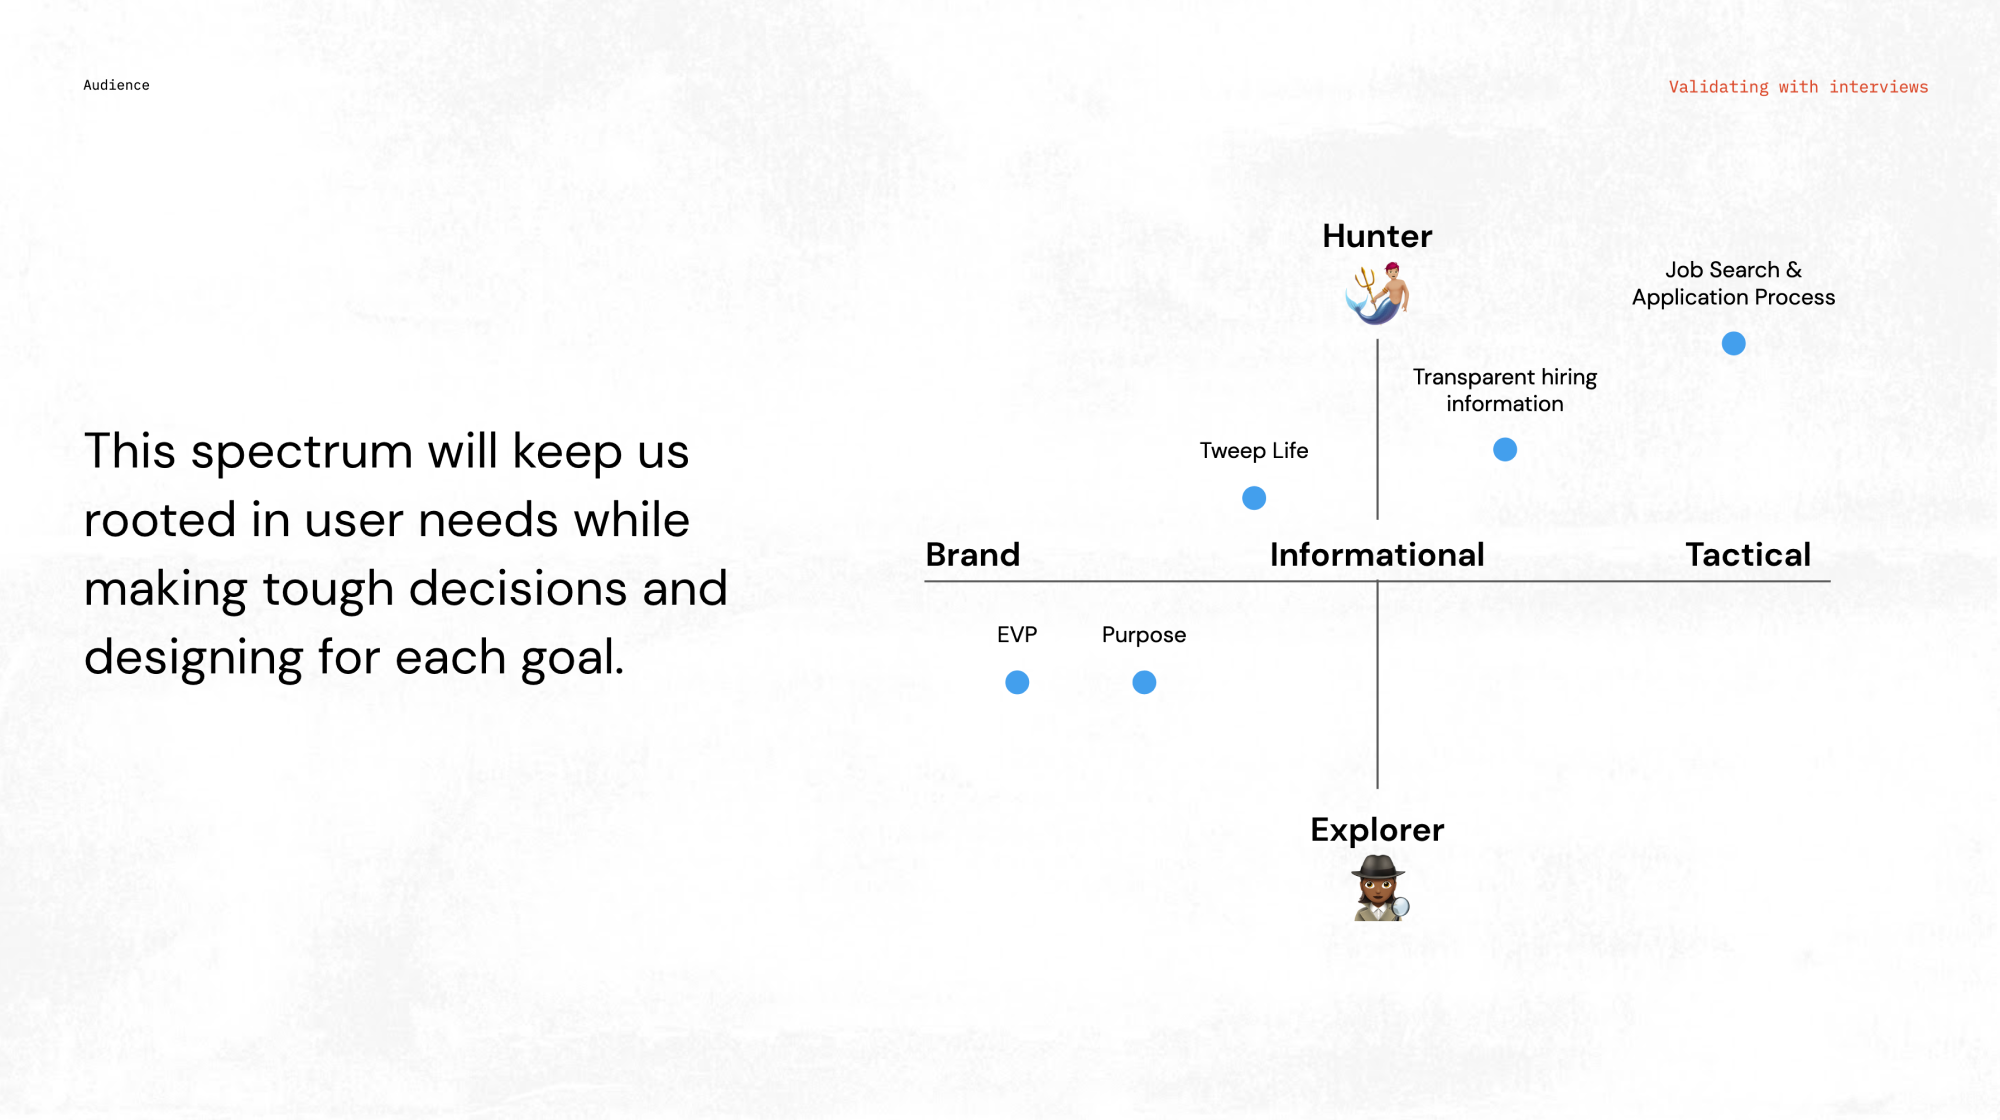 Slide outlining the goals for the Twitter Careers website to our audiencees